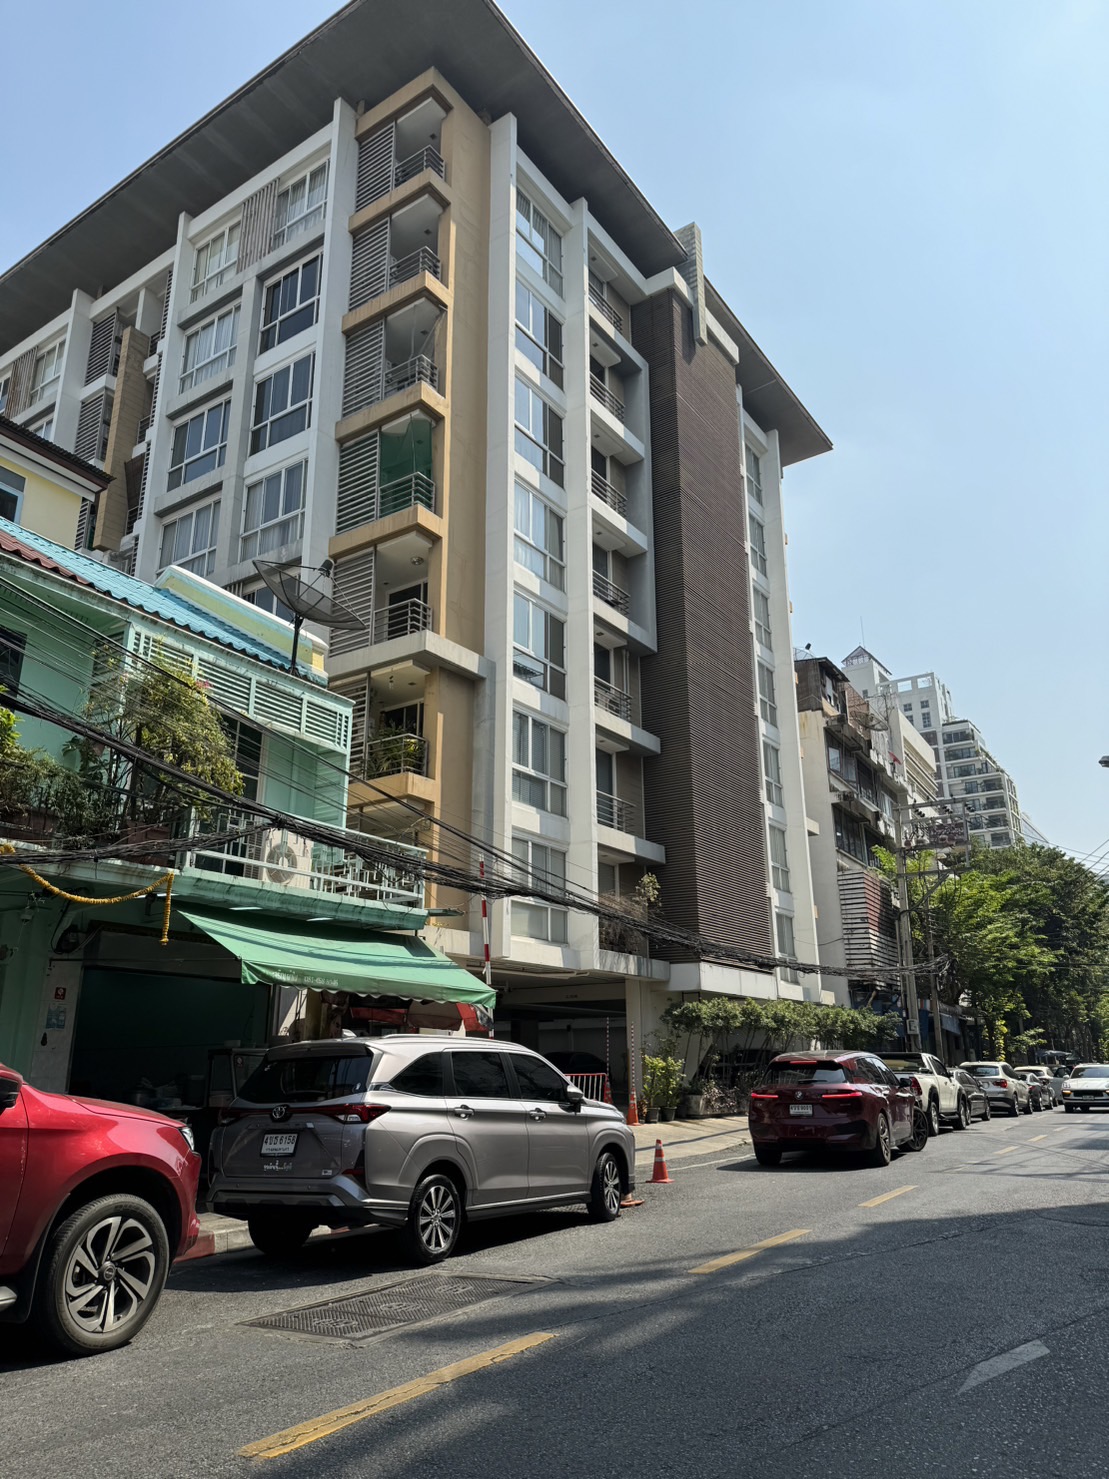 The Treasure Silom is a condominium project, located on Pan Road. The Condominium haves 8 floors and includes 13 units.